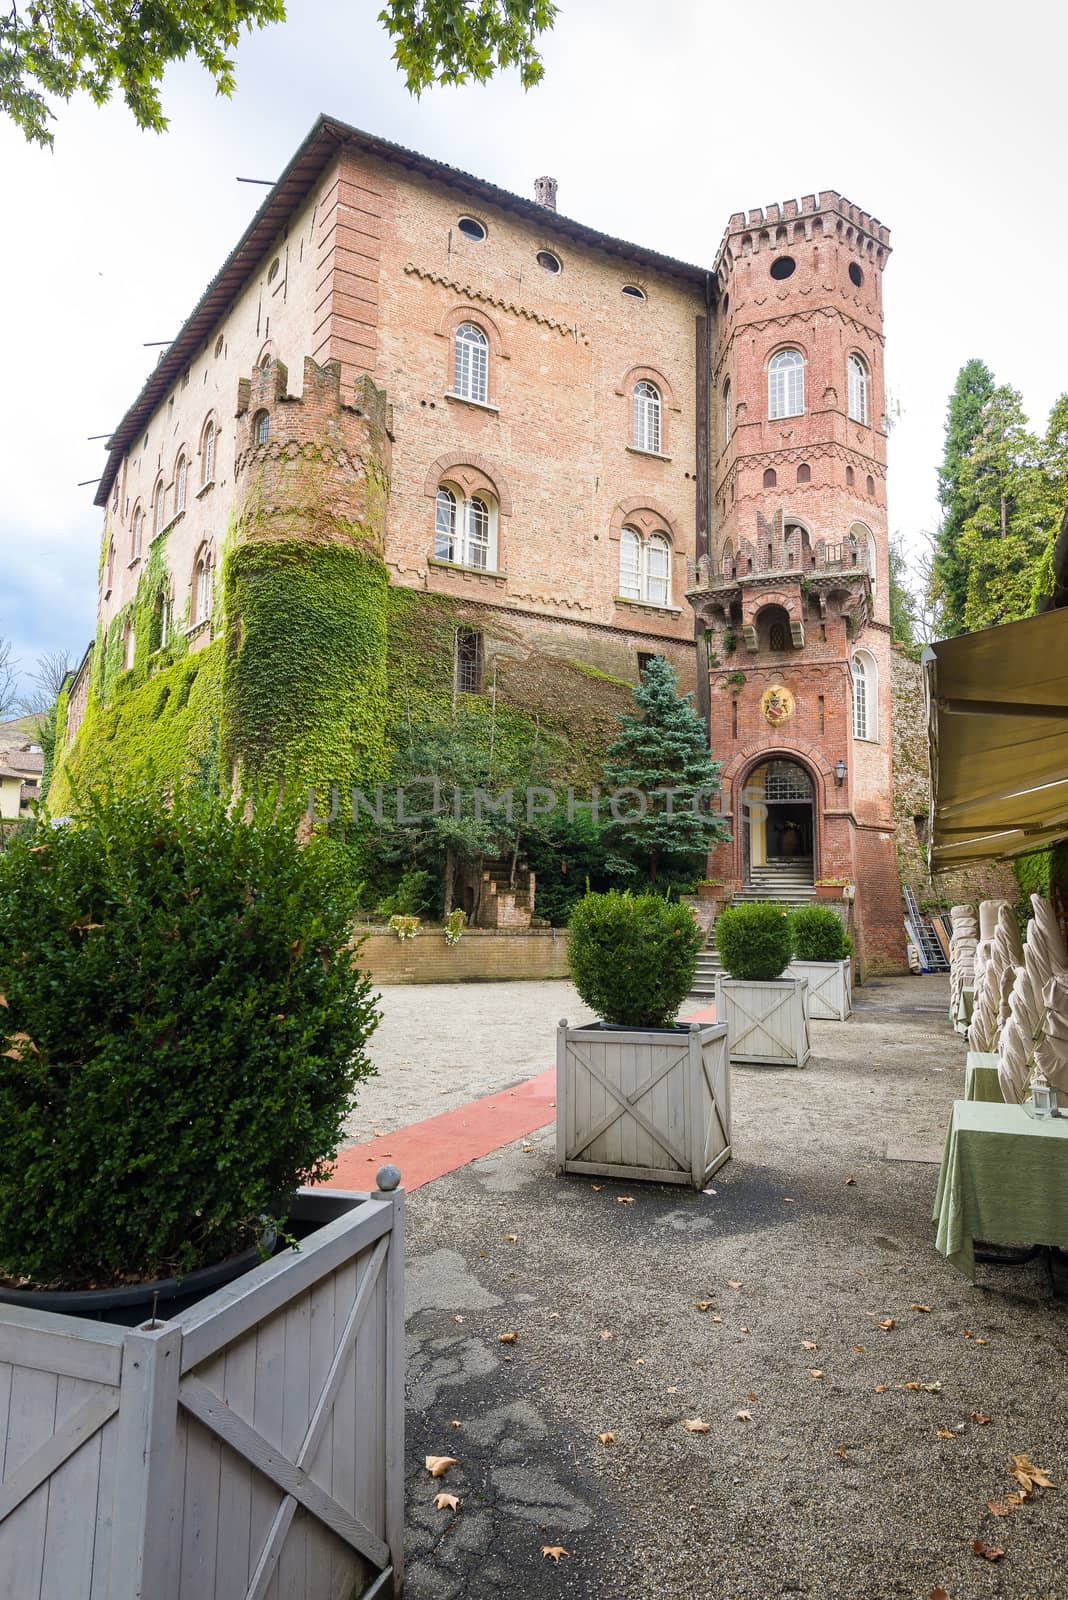 Royal Castle of Oviglio in Piedmont by faabi